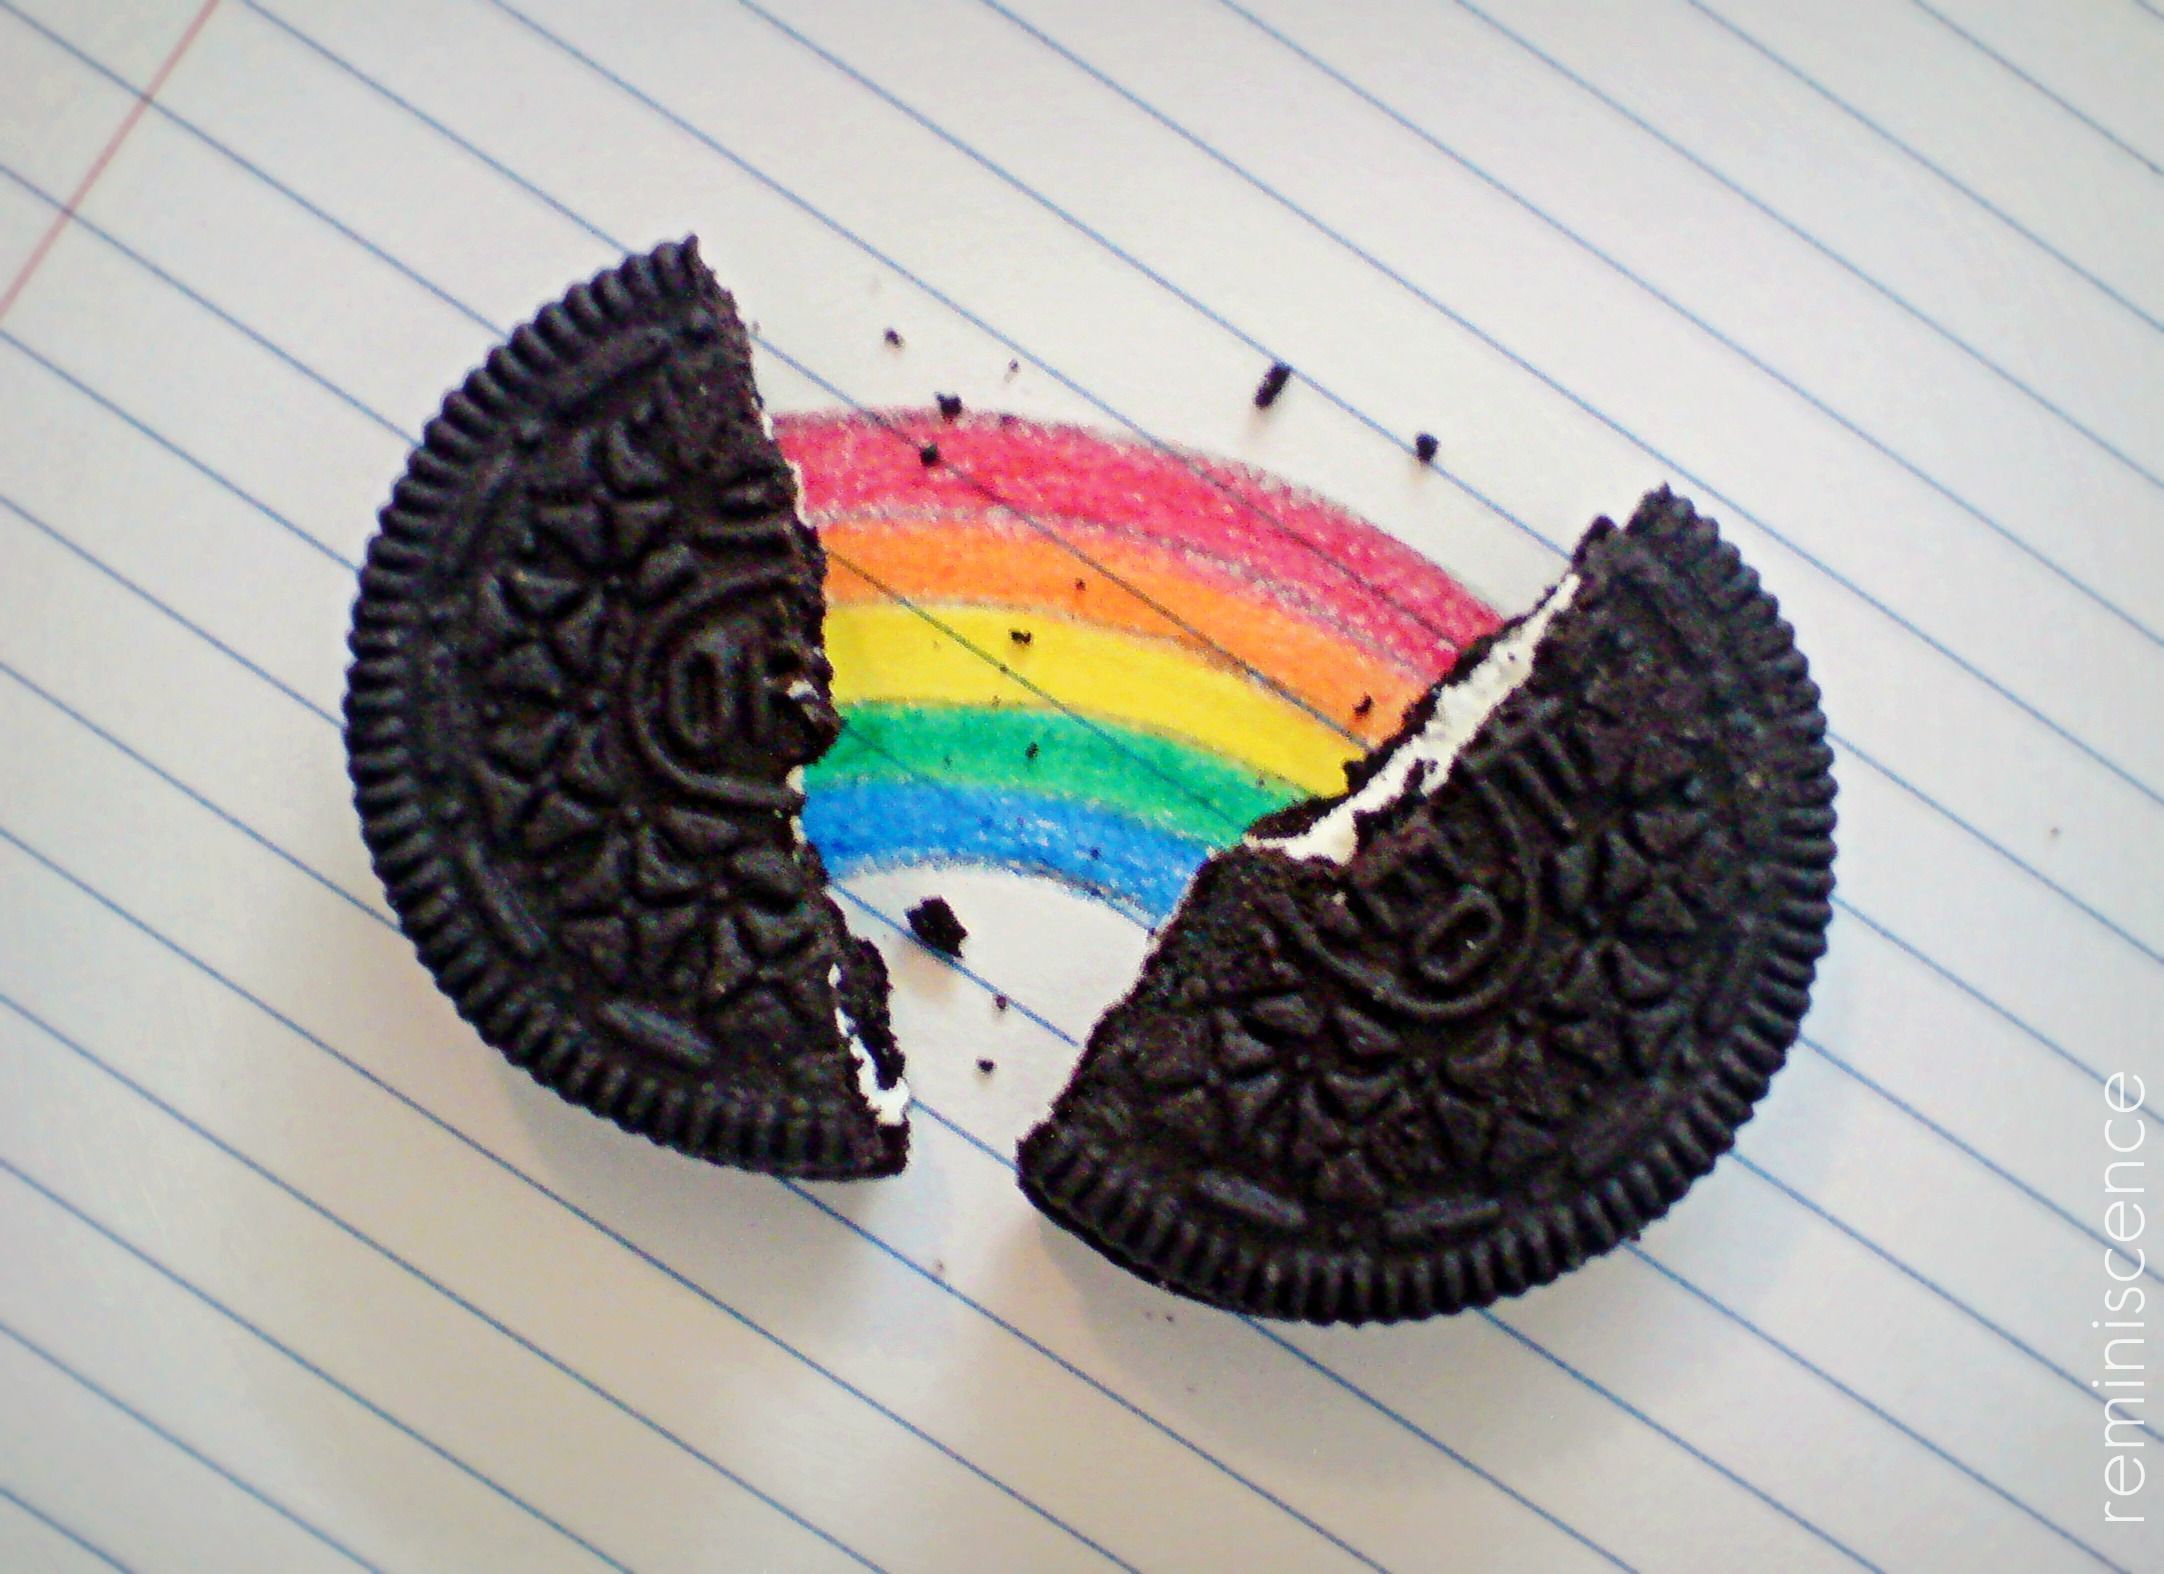 An Oreo cookie broken in half with a rainbow drawn on the inside - Oreo